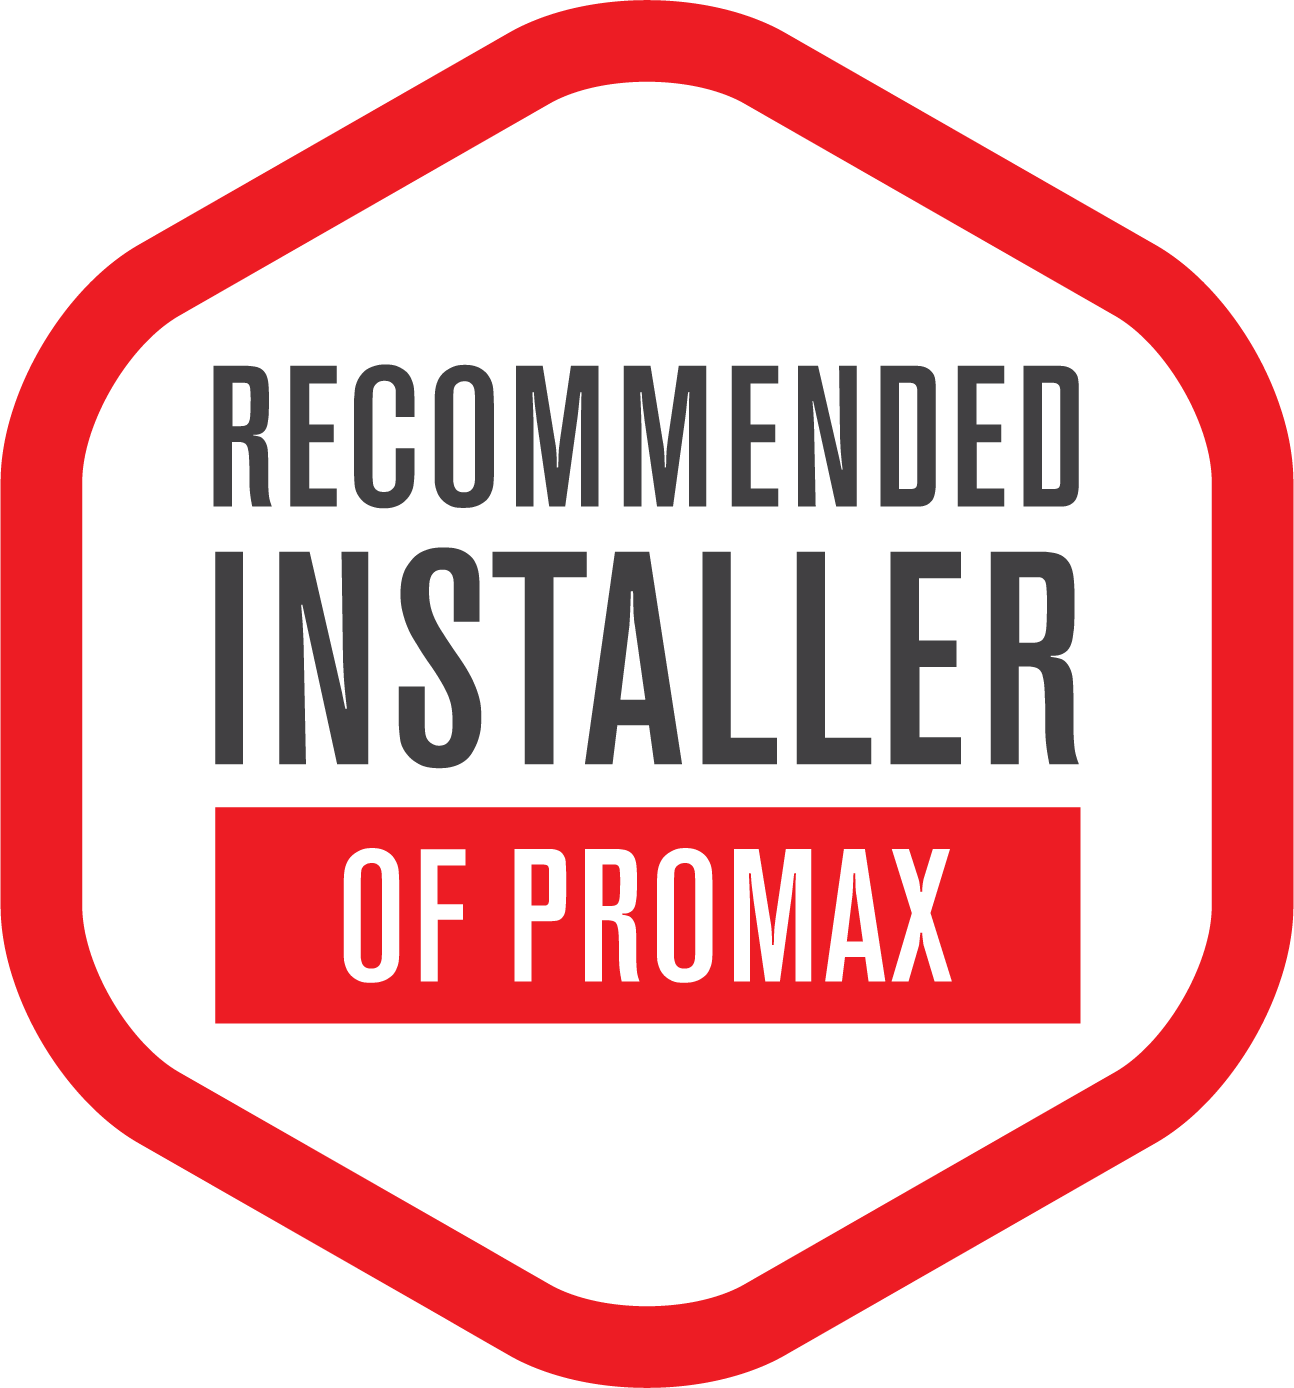 Recommended Installers